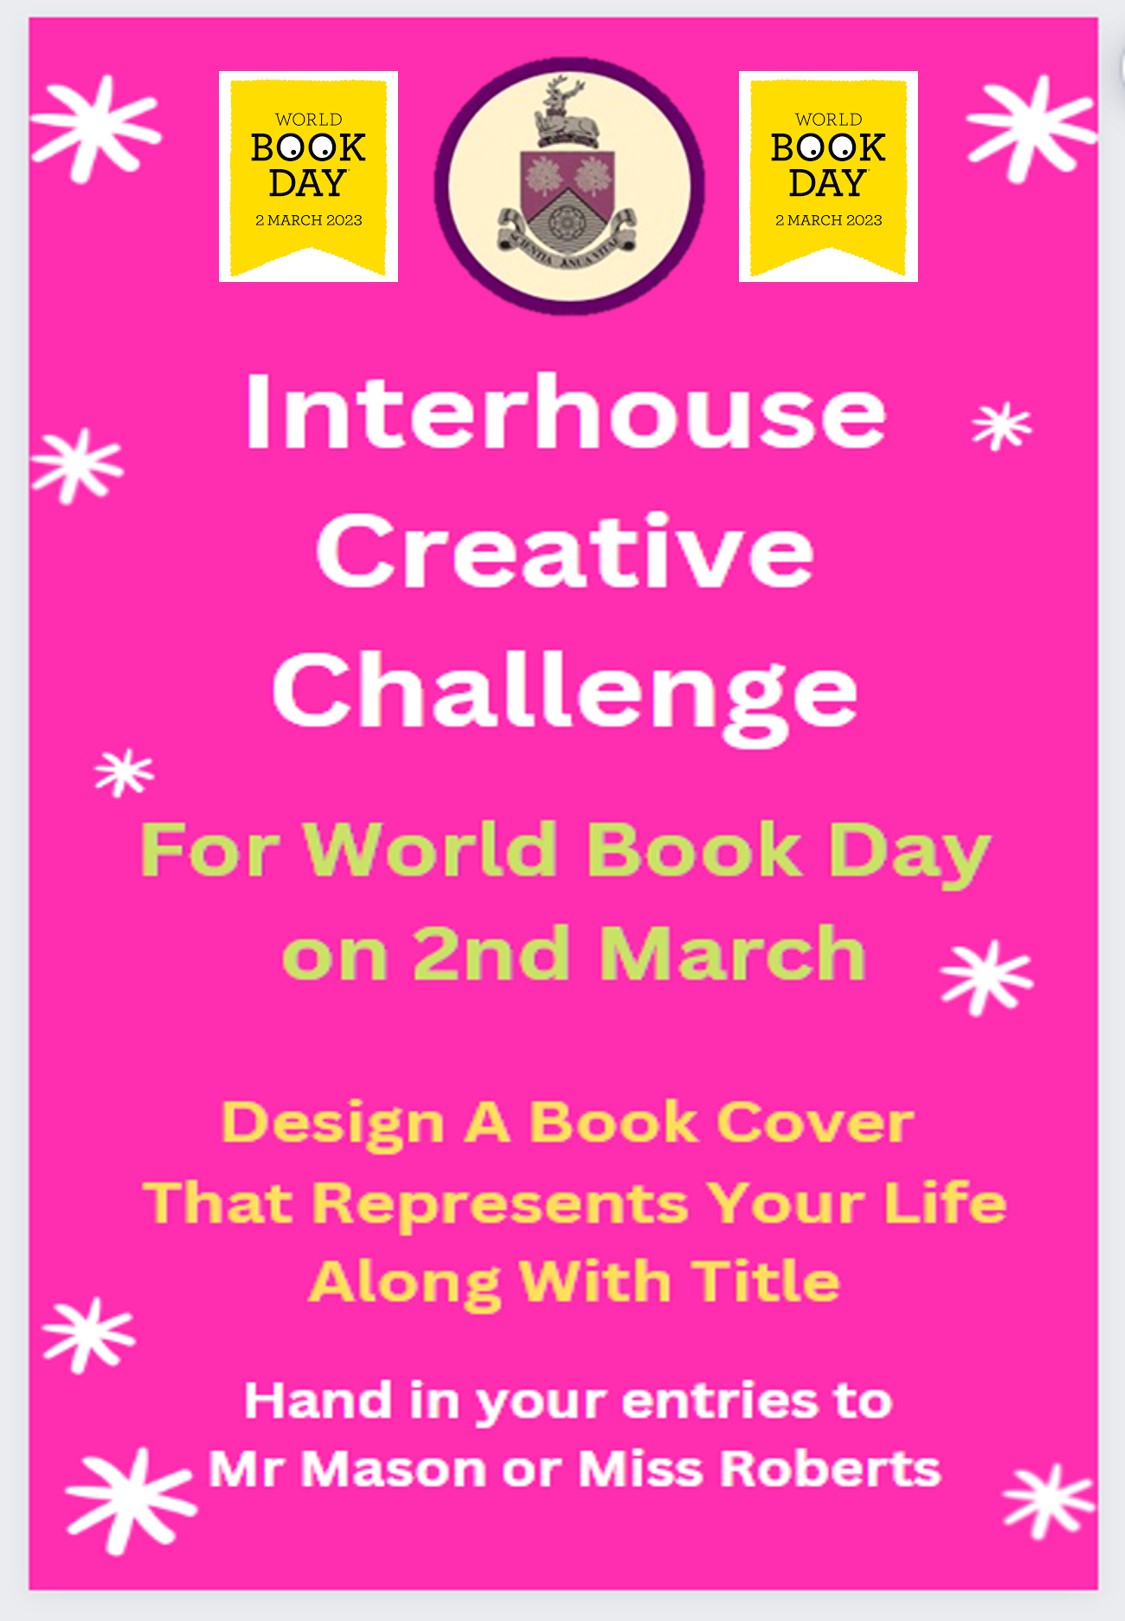 Interhouse competition for World Book Day- design a book cover about you representing your life. Remember the title is important too. Hand in your entries to Mr Mason or Miss Roberts.